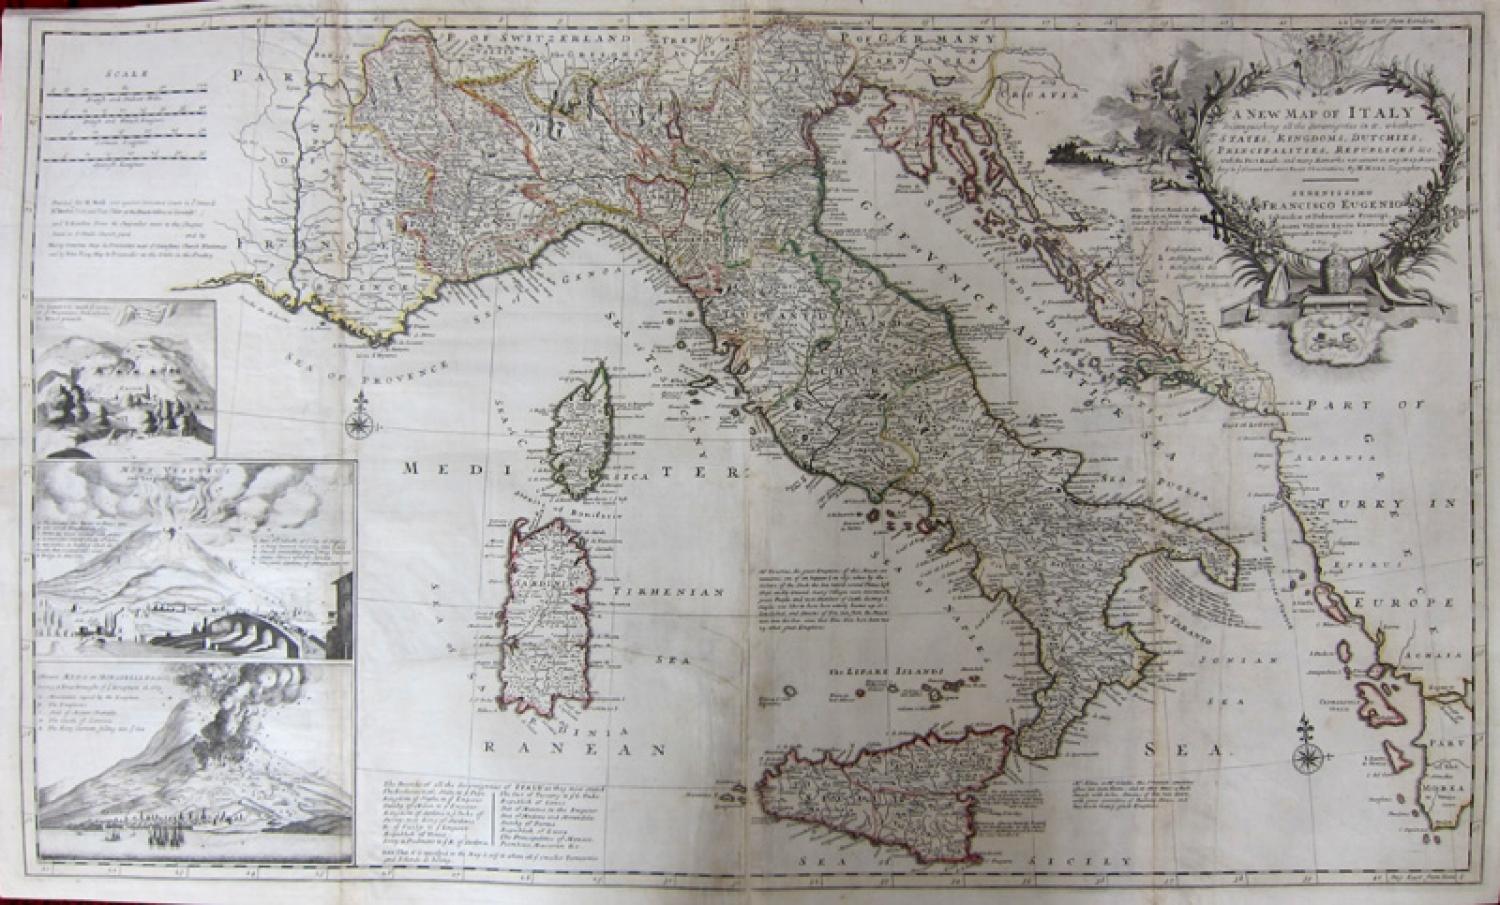 SOLD A New Map of Italy